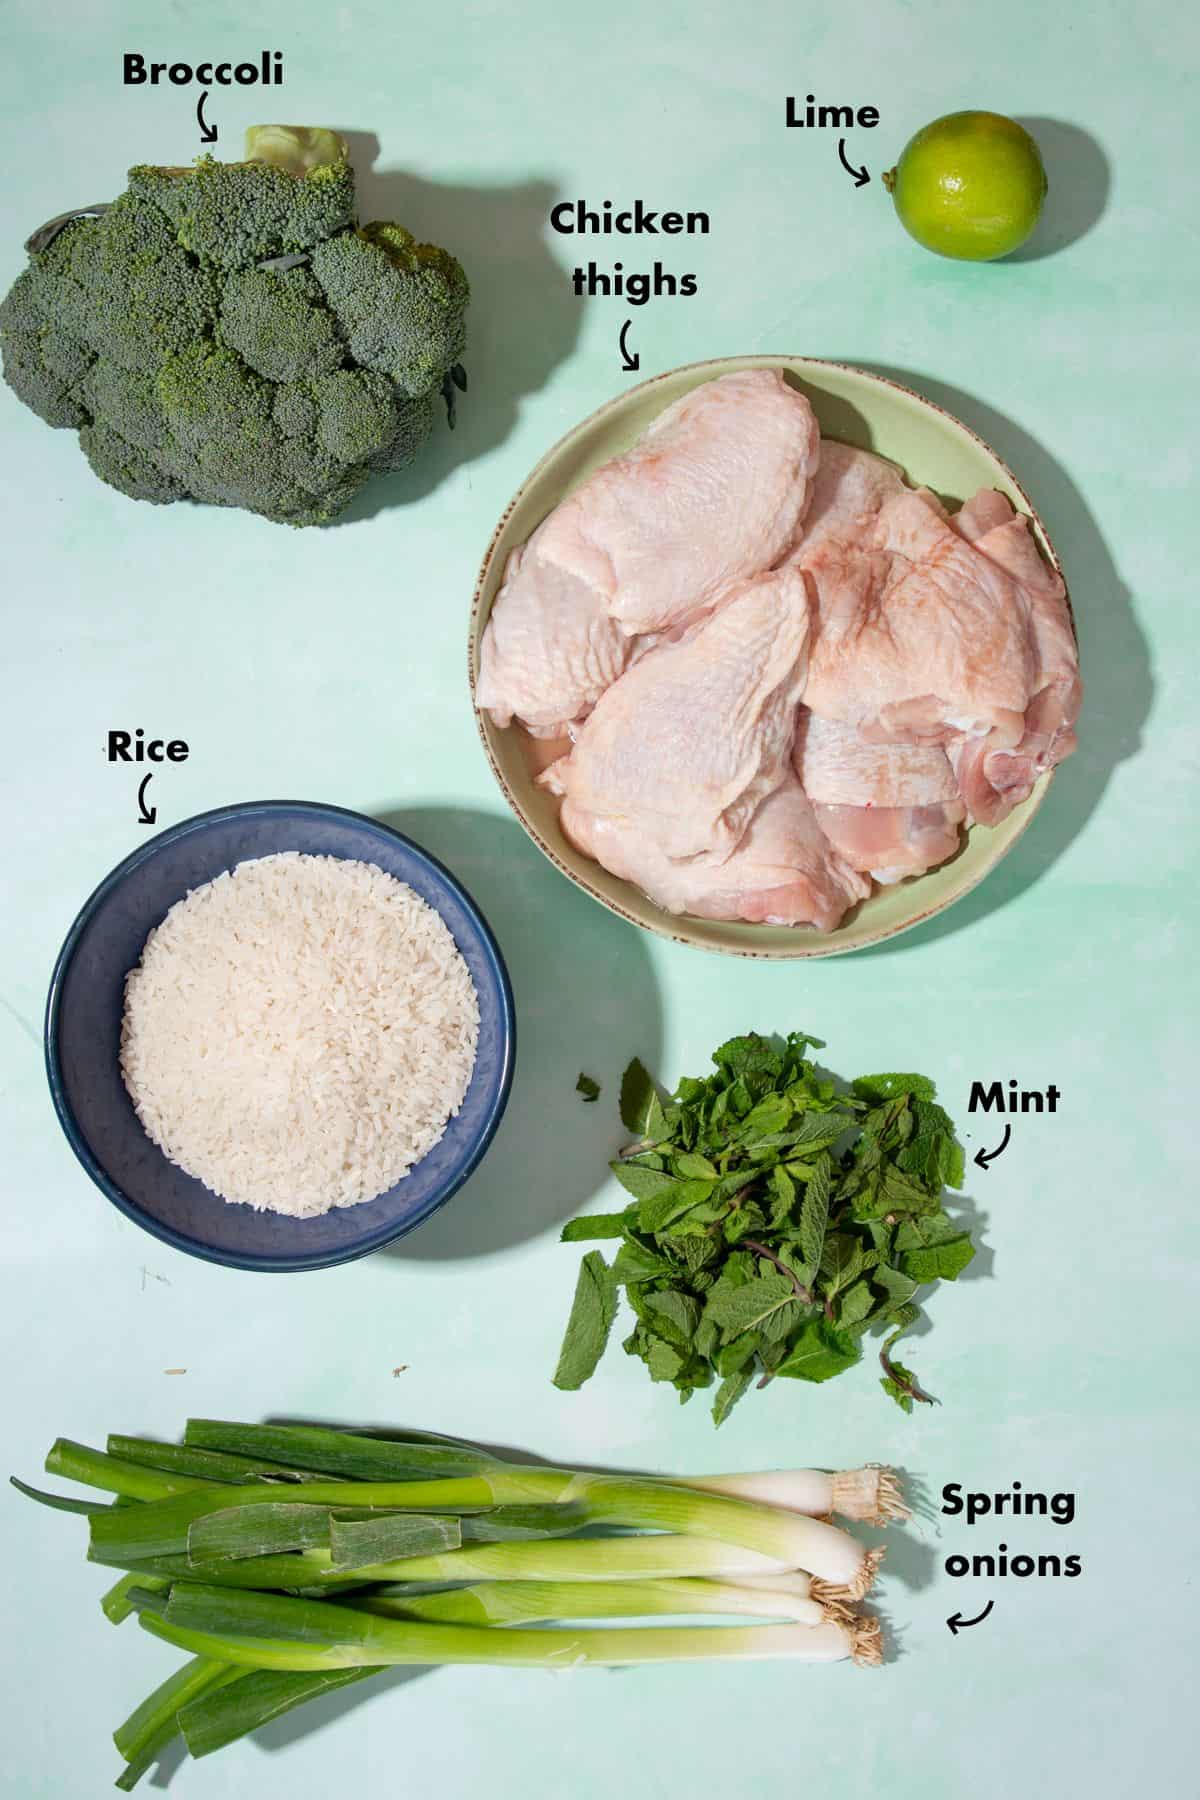 Ingredients to make the chicken and rice laid out on a pale blue background and labelled.